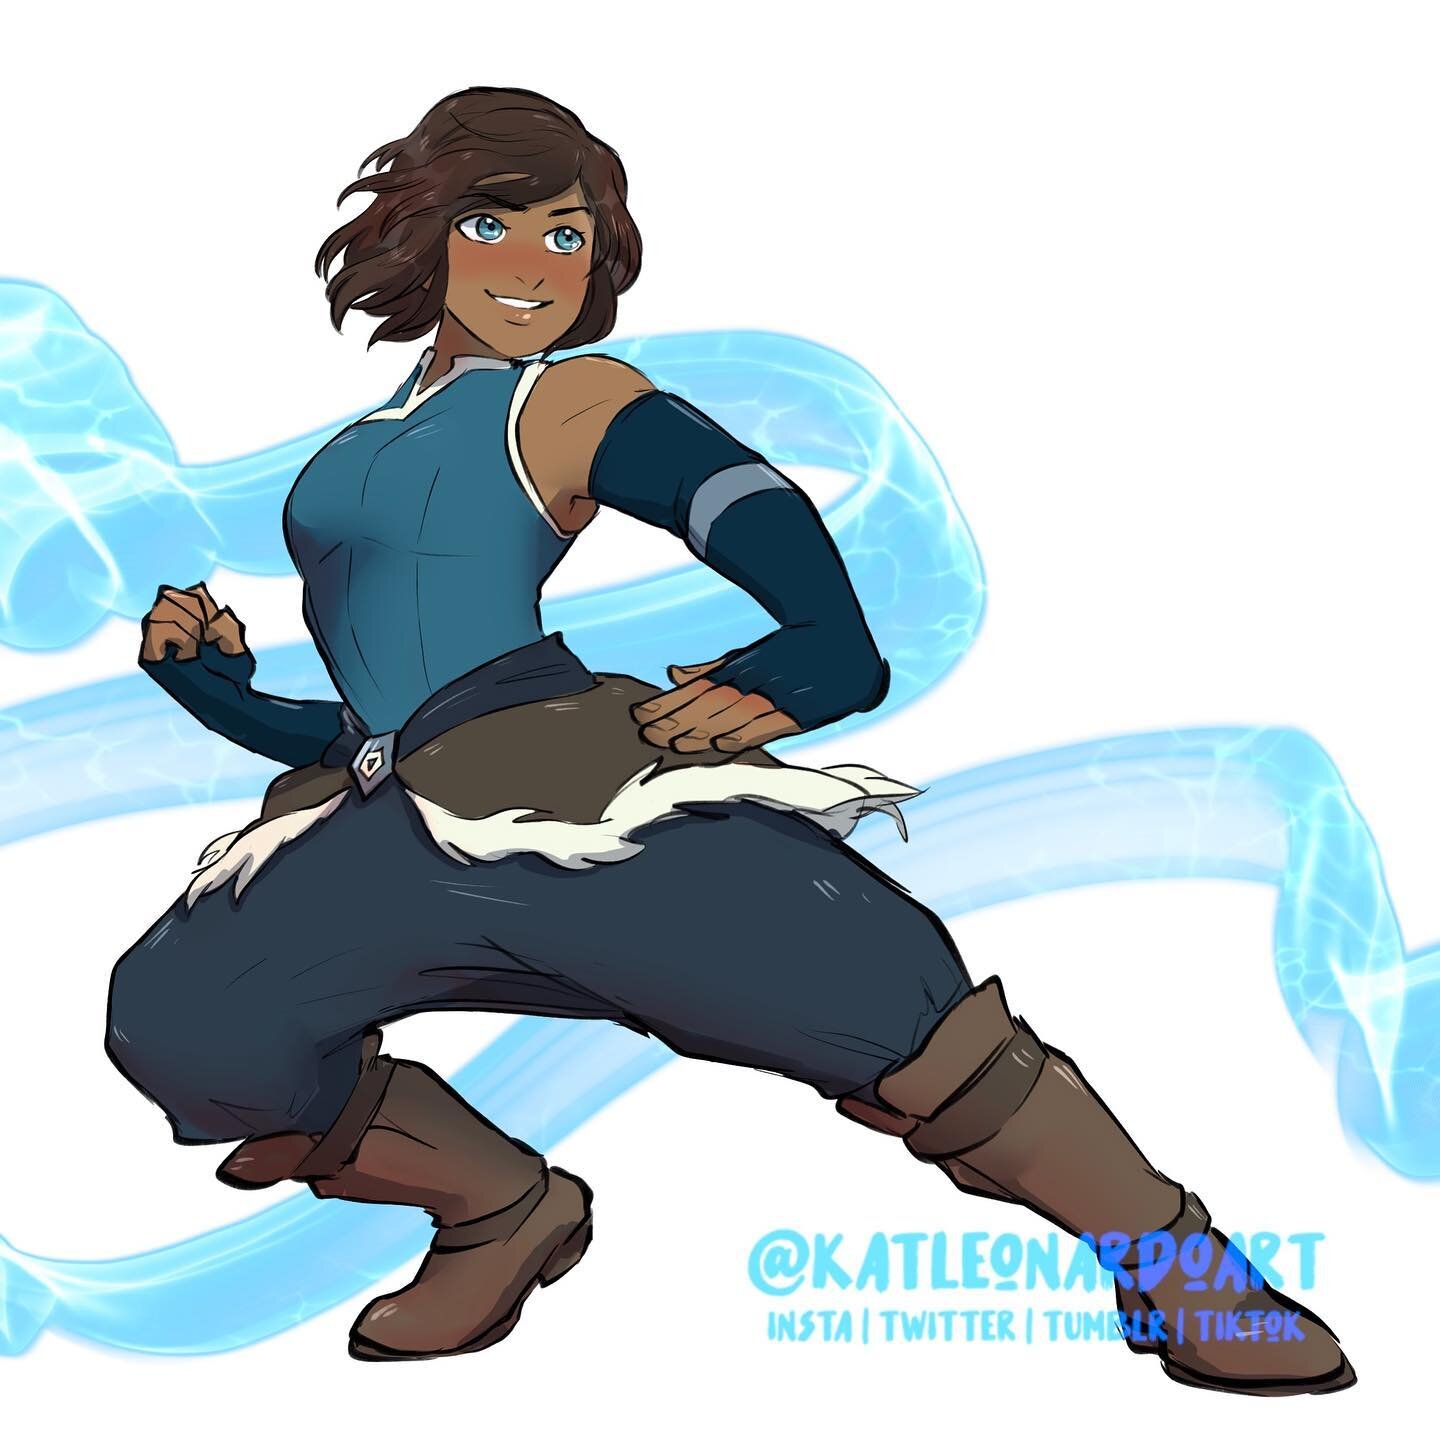 Quick WIP featuring Korra!! ✨🌊🌊🌊happy Lunar New Year YALL!! :)) 

[ID: illustration of Korra, an athletic young adult female protagonist from The Legend of Korra in a dynamic stance appearing to be waterbending. Her hair is about shoulder length-s